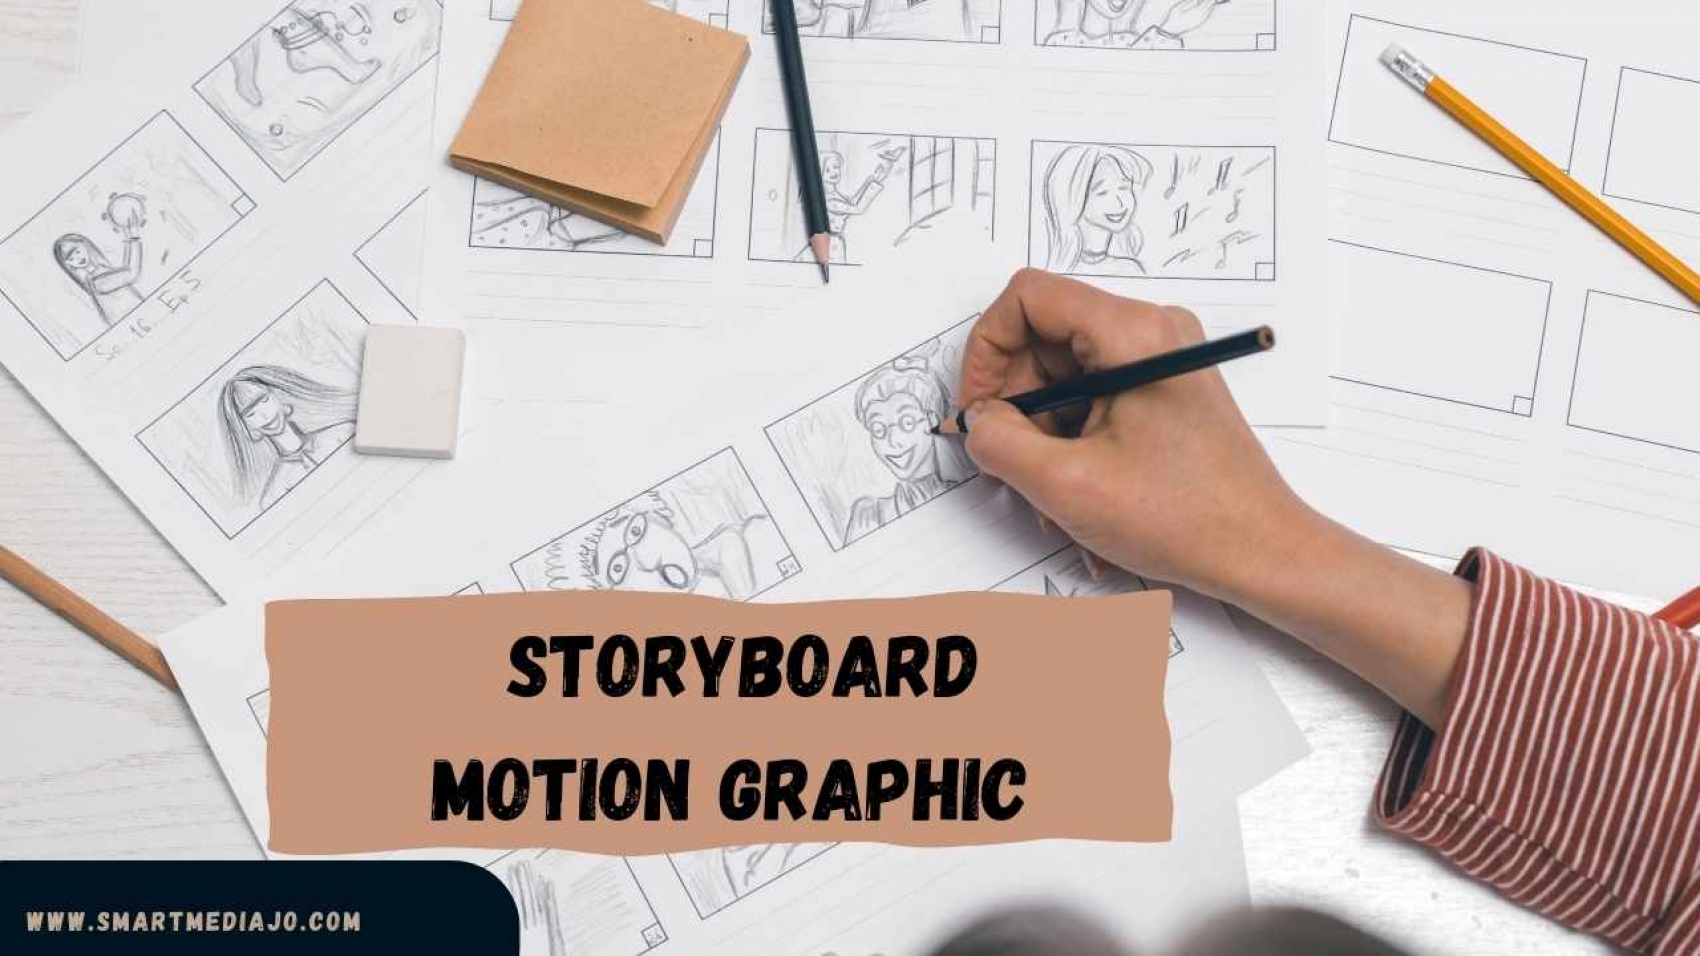 Storyboard Motion Graphic